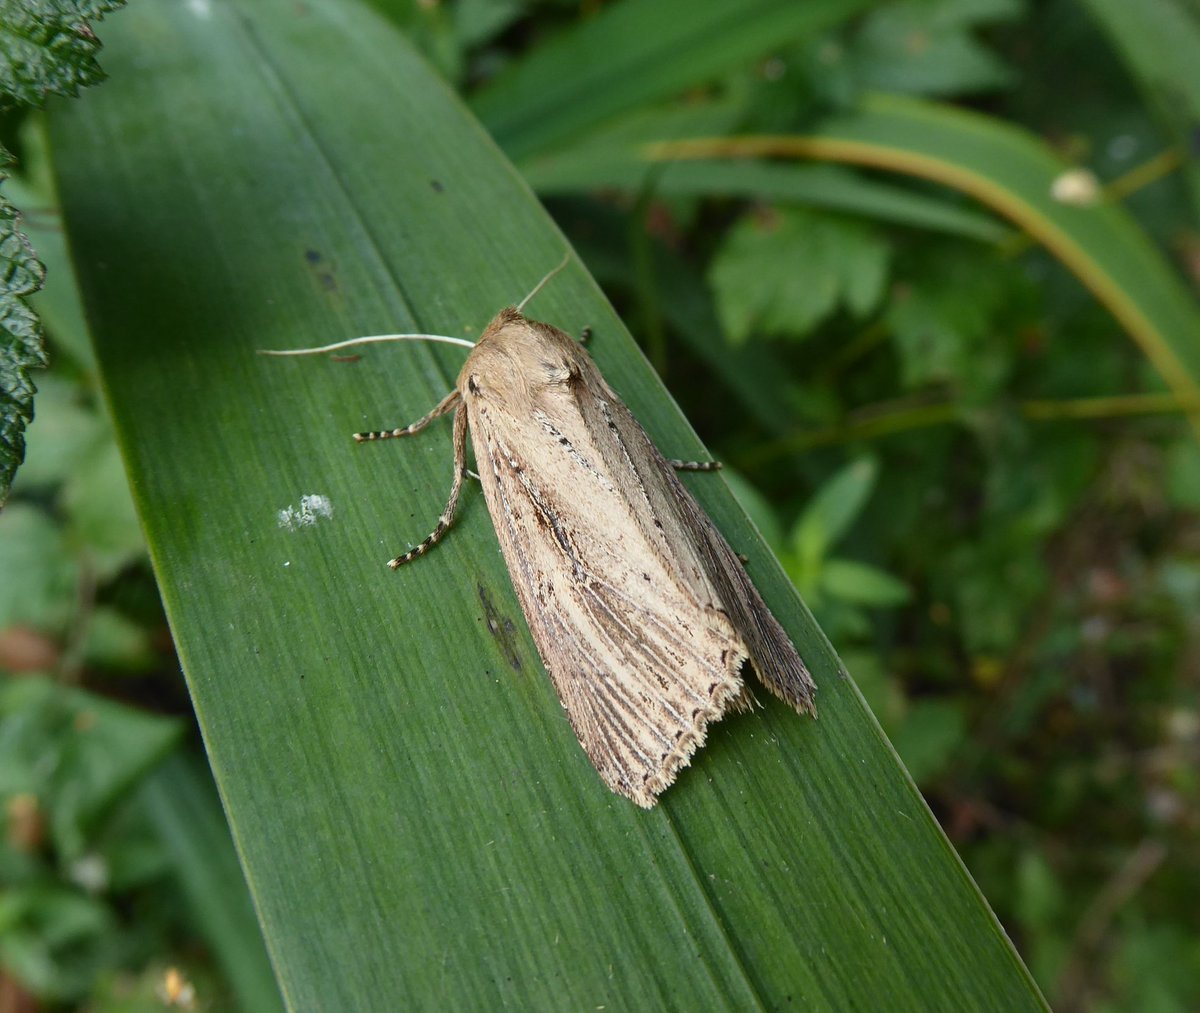 Better weather this weekend and had some lovely #autumn moths this morning! 🦋🦋 Sallow, Frosted Orange, Beaded Chestnut and Bulrush Wainscot #MothsMatter @BC_Lincolnshire @savebutterflies